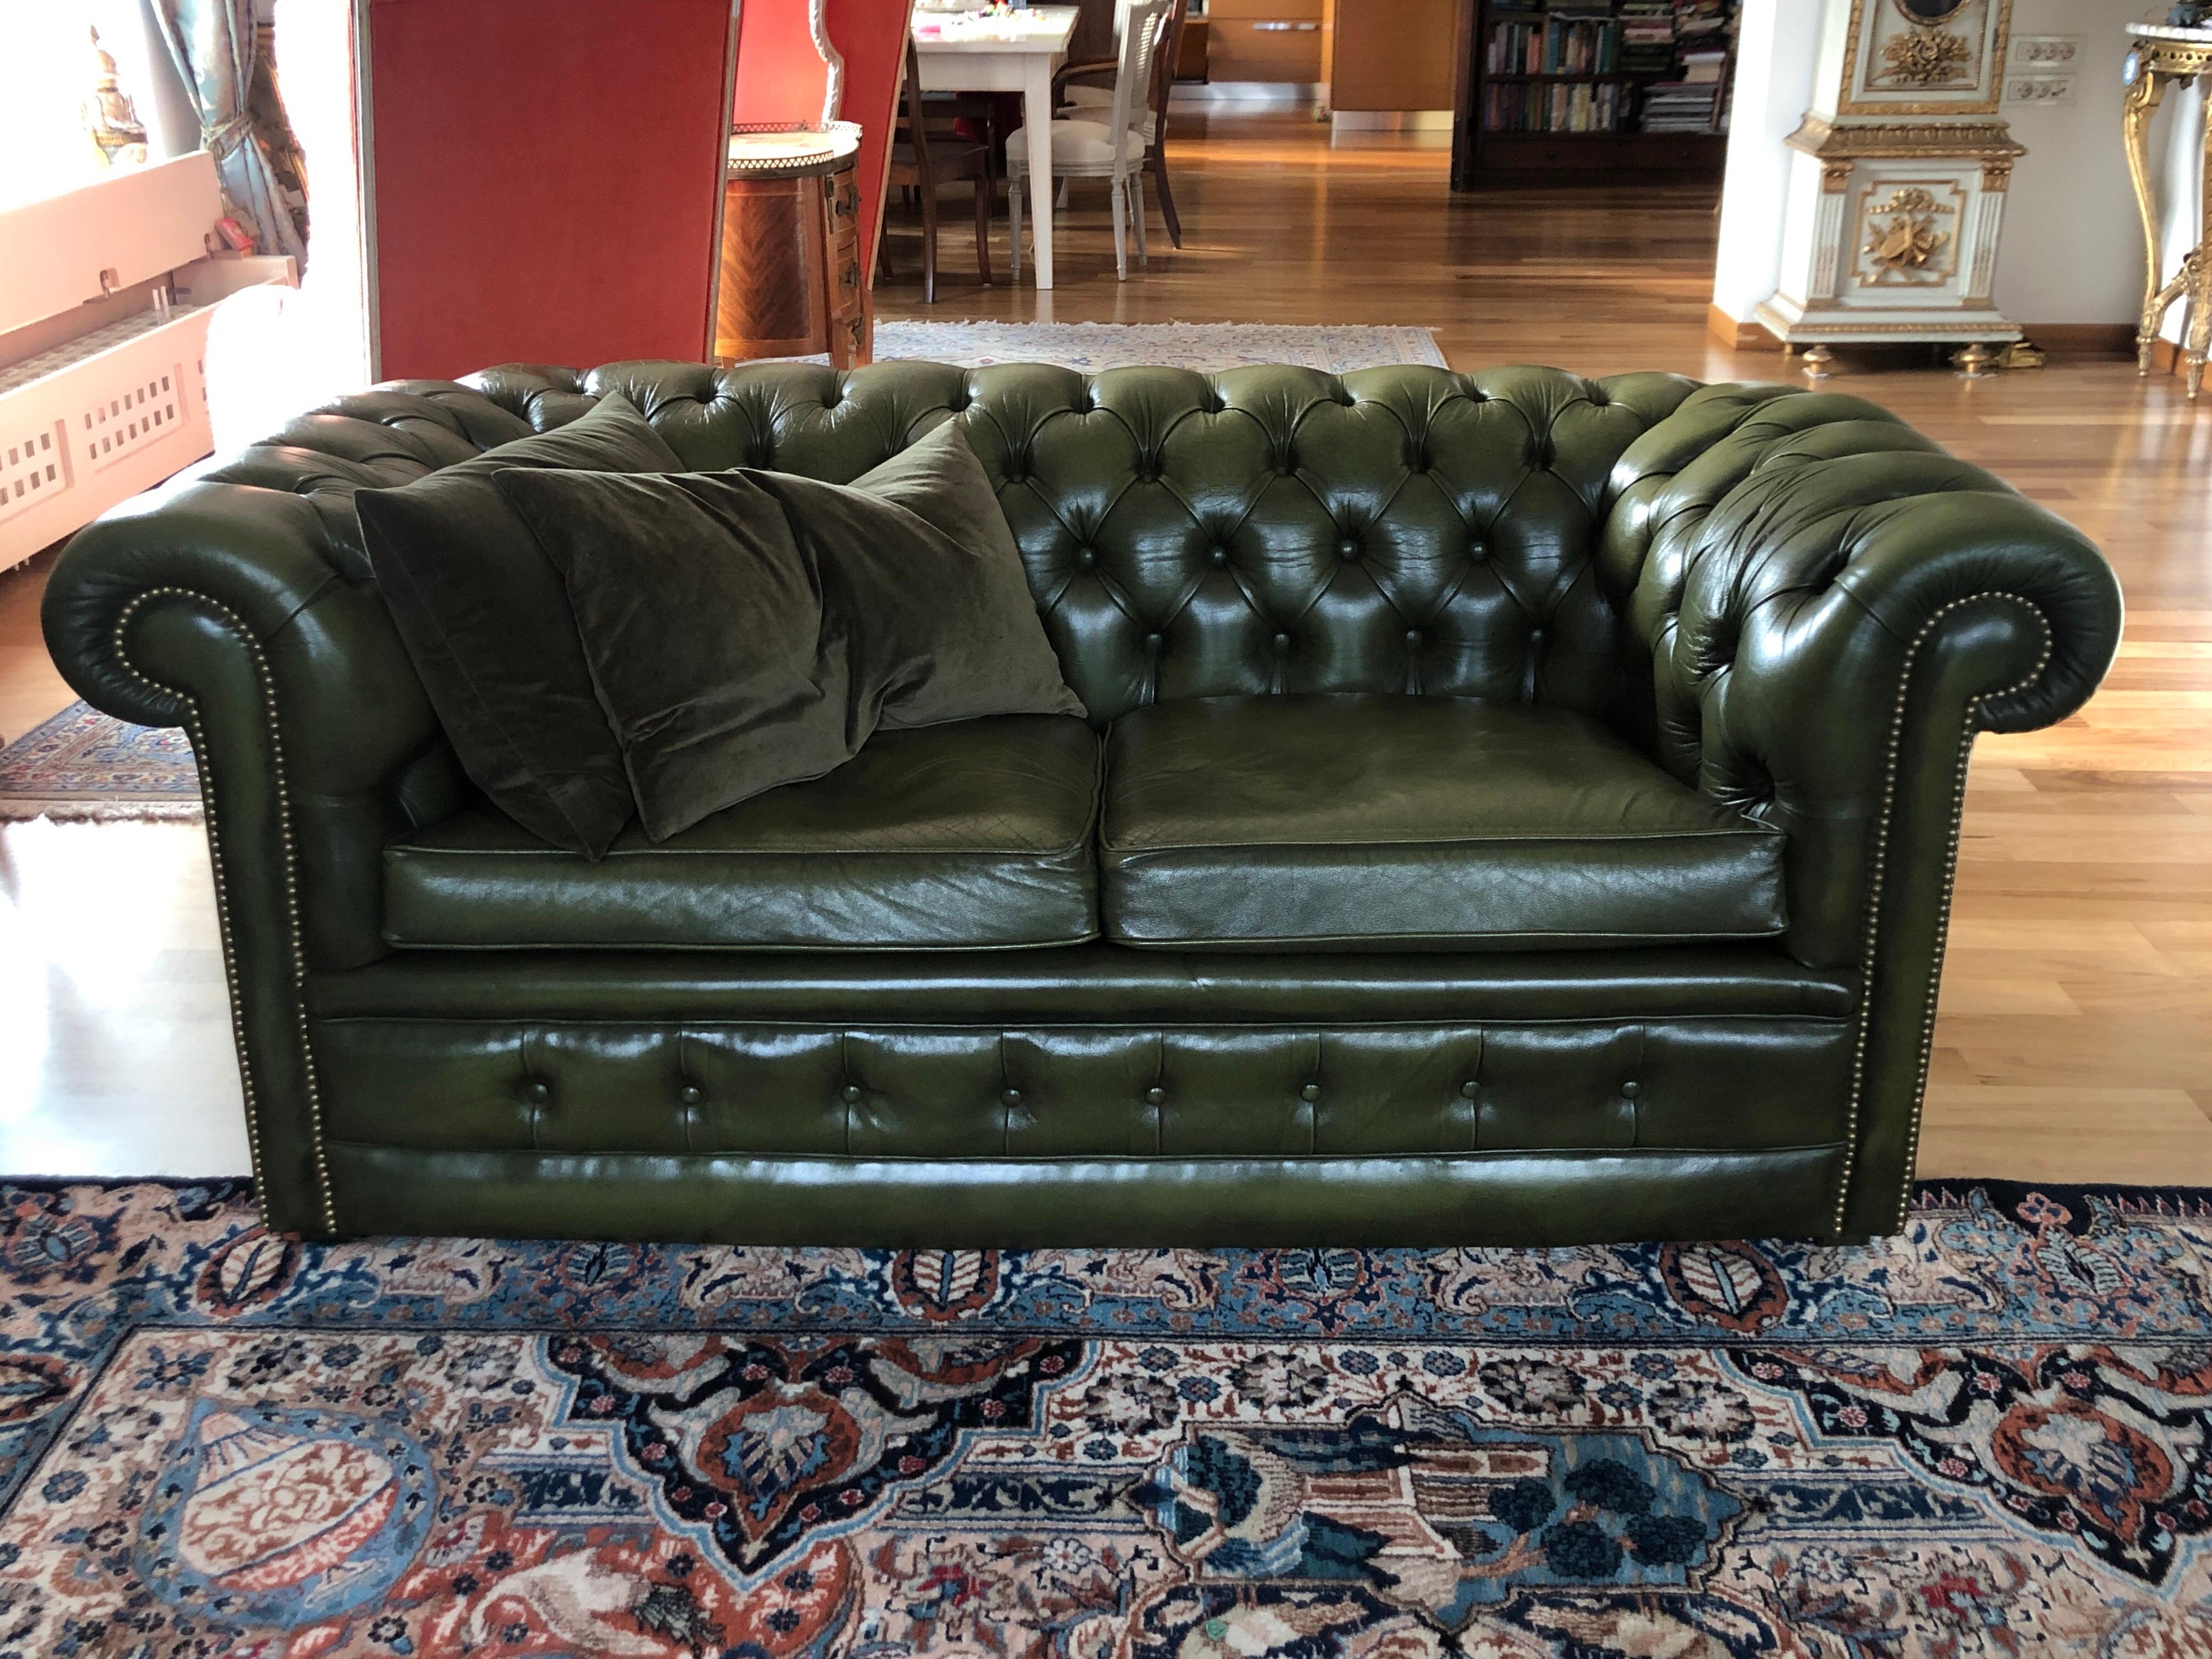 Two seated Chesterfield sofa in dark green with two cushions.
Very good condition.
England, circa 1960.